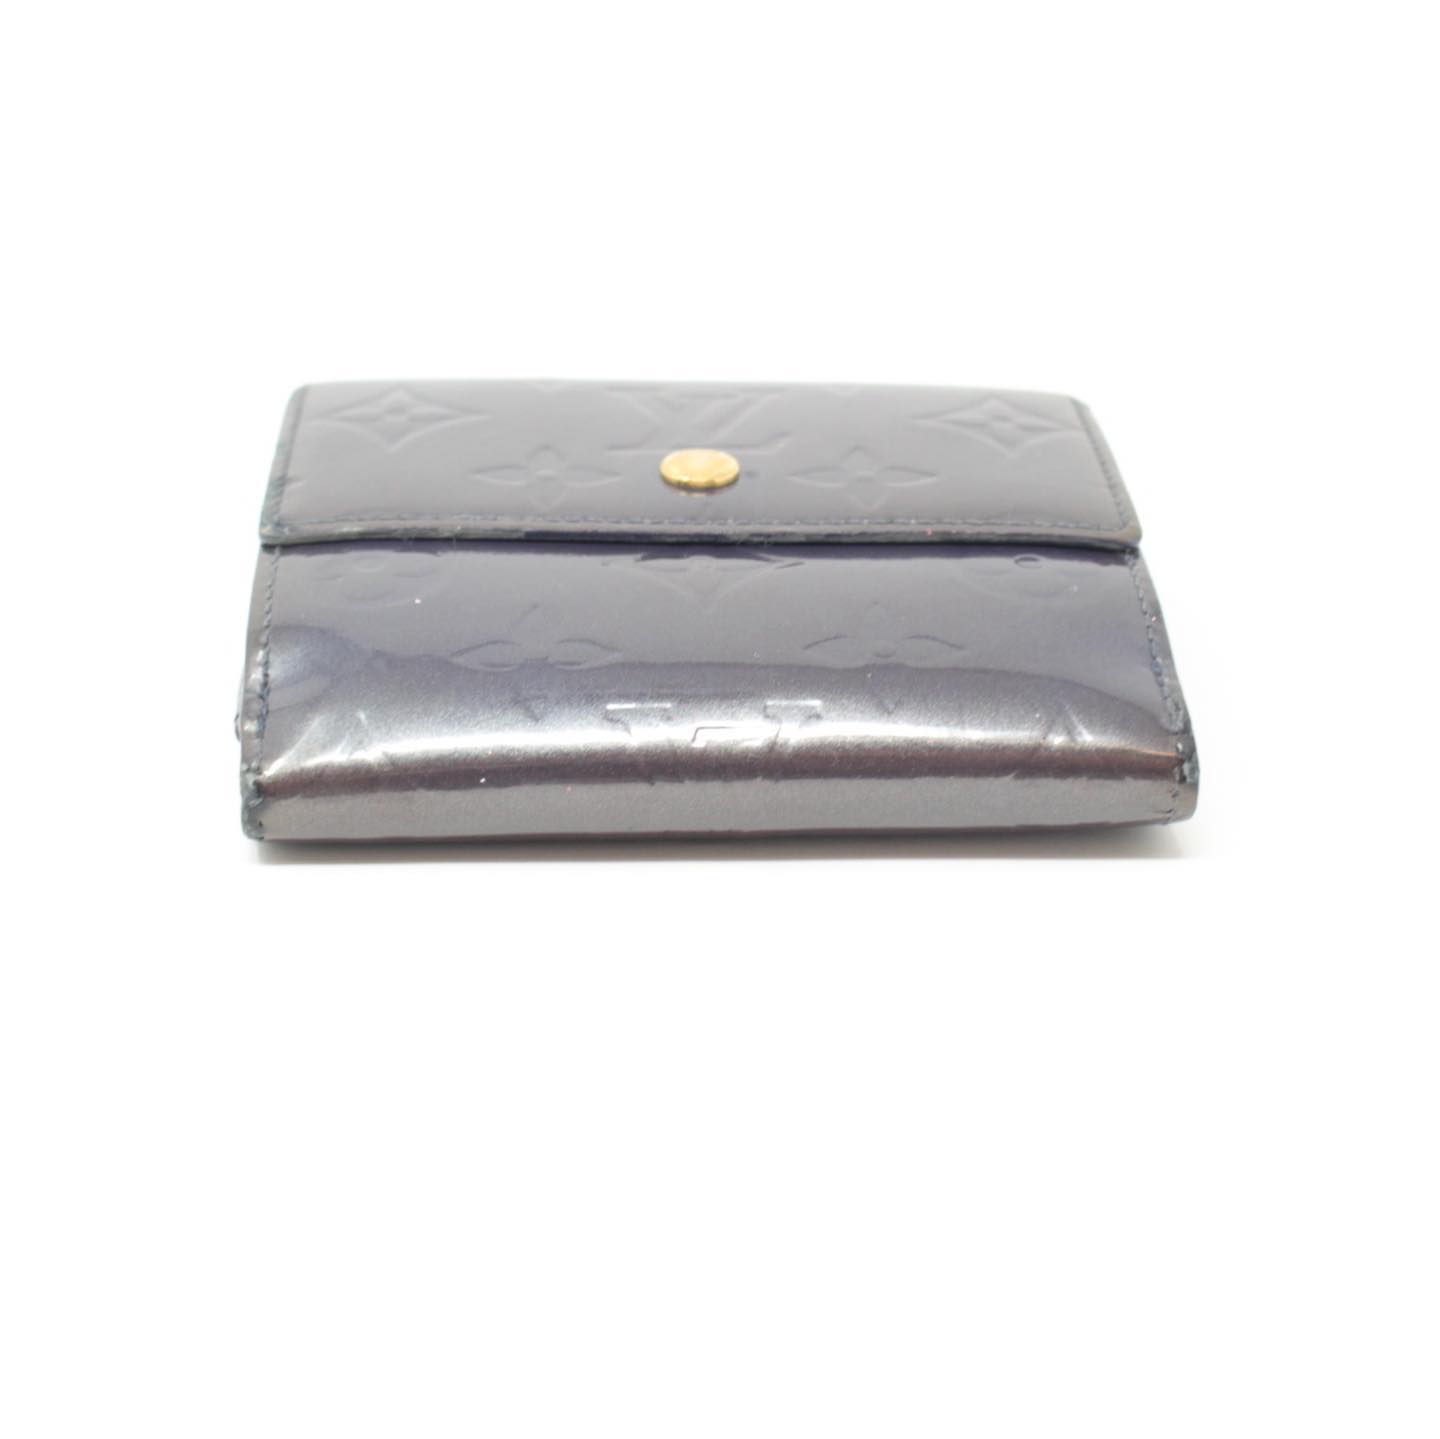 LOUIS VUITTON Gray Vernis Cartes Wallet #26377 – ALL YOUR BLISS